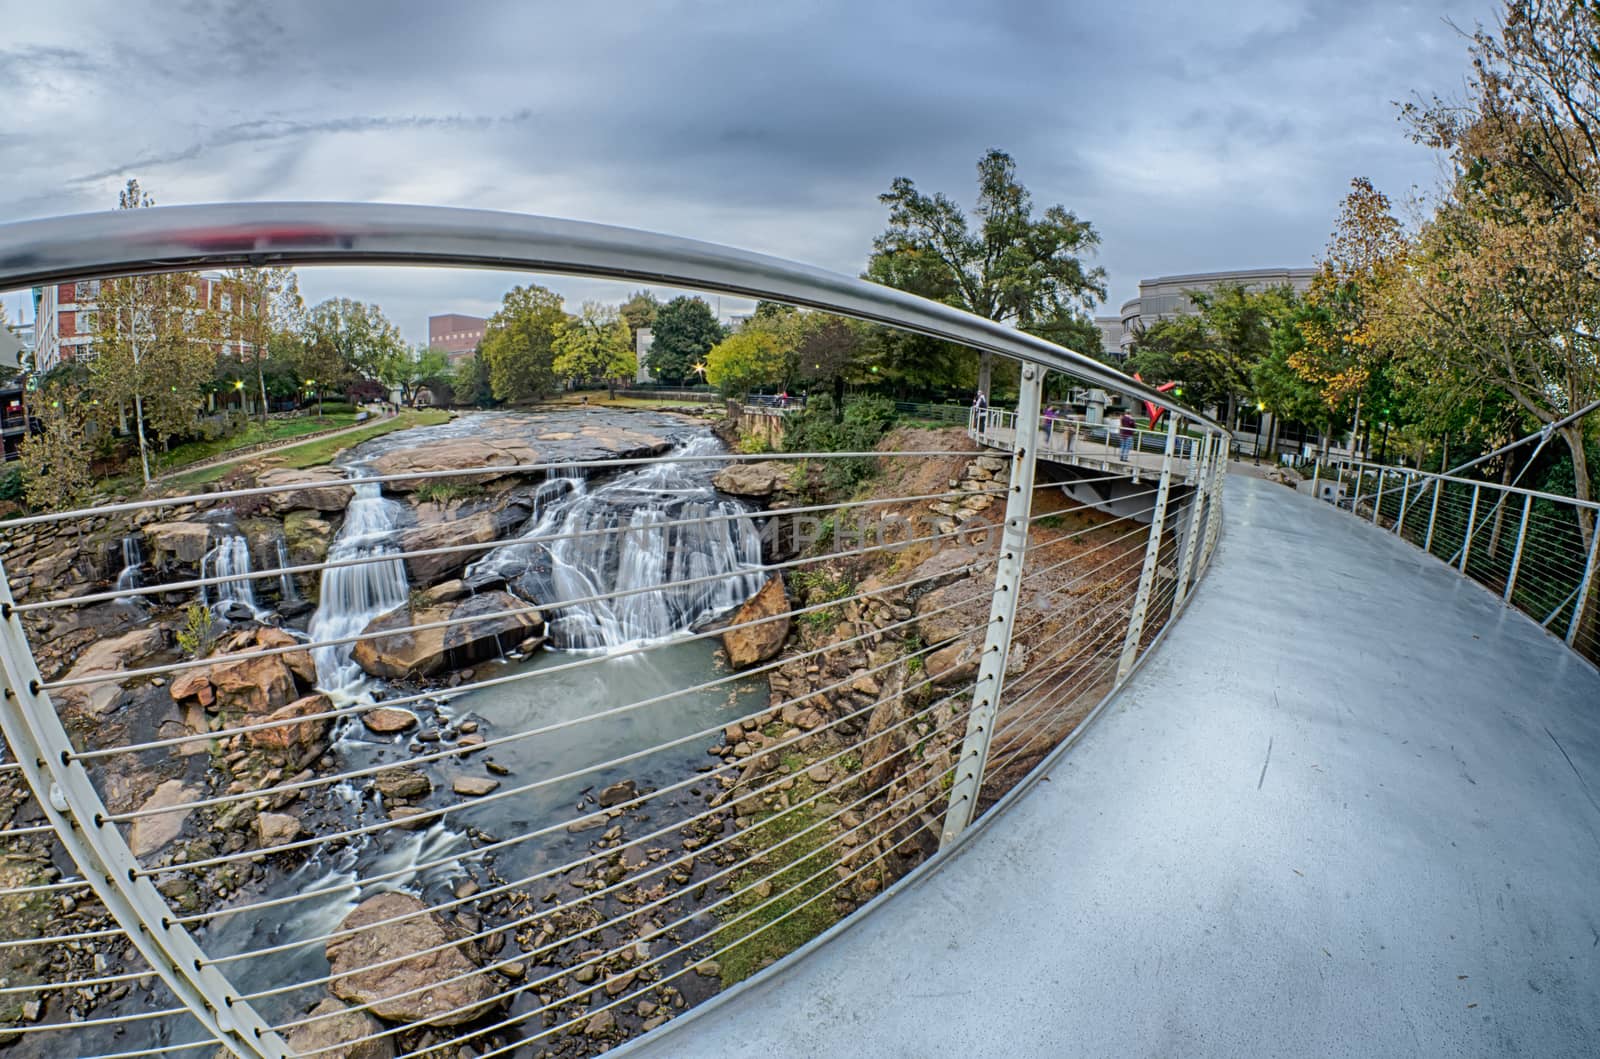 downtown of greenville south carolina around falls park by digidreamgrafix